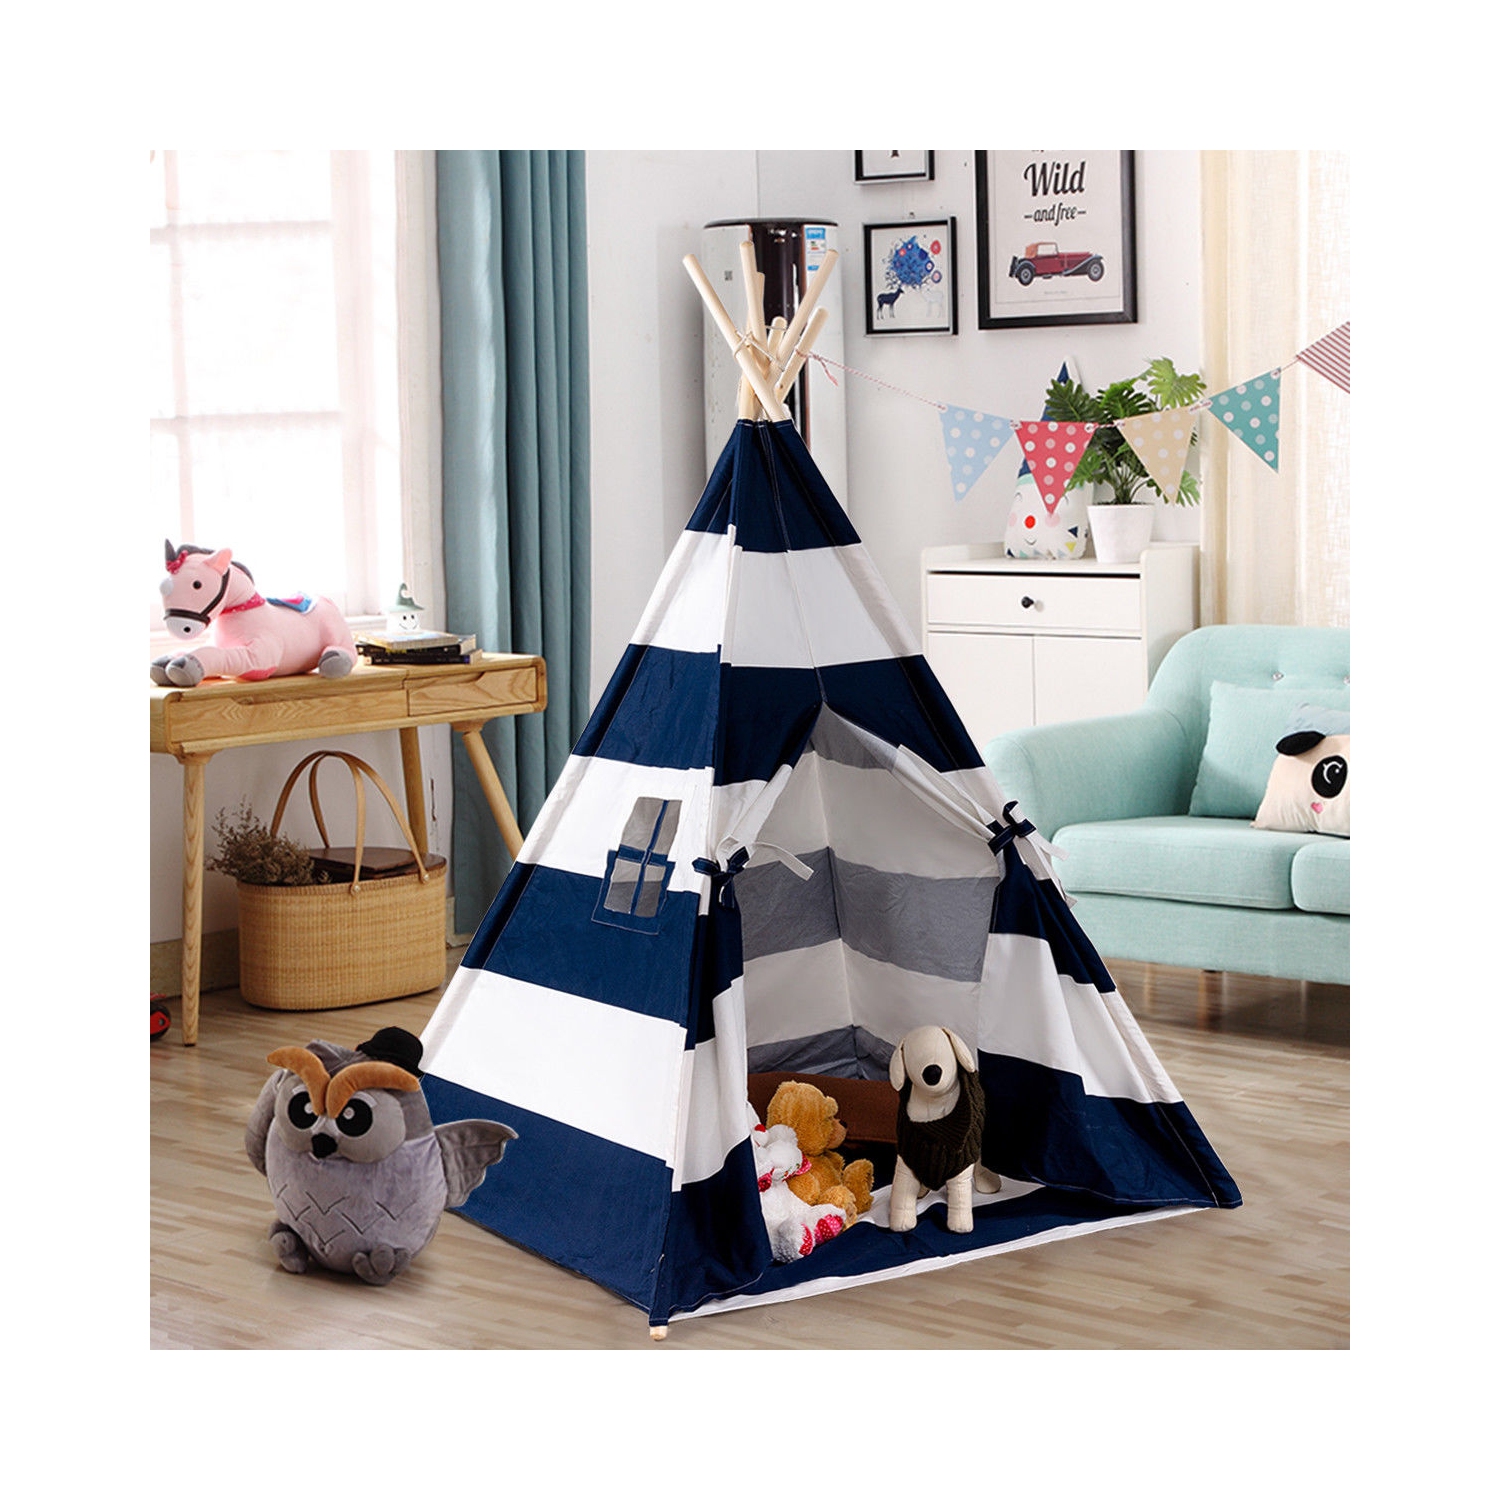 Gymax Portable Play Tent Teepee Children Playhouse Sleeping Dome w/Carry Bag